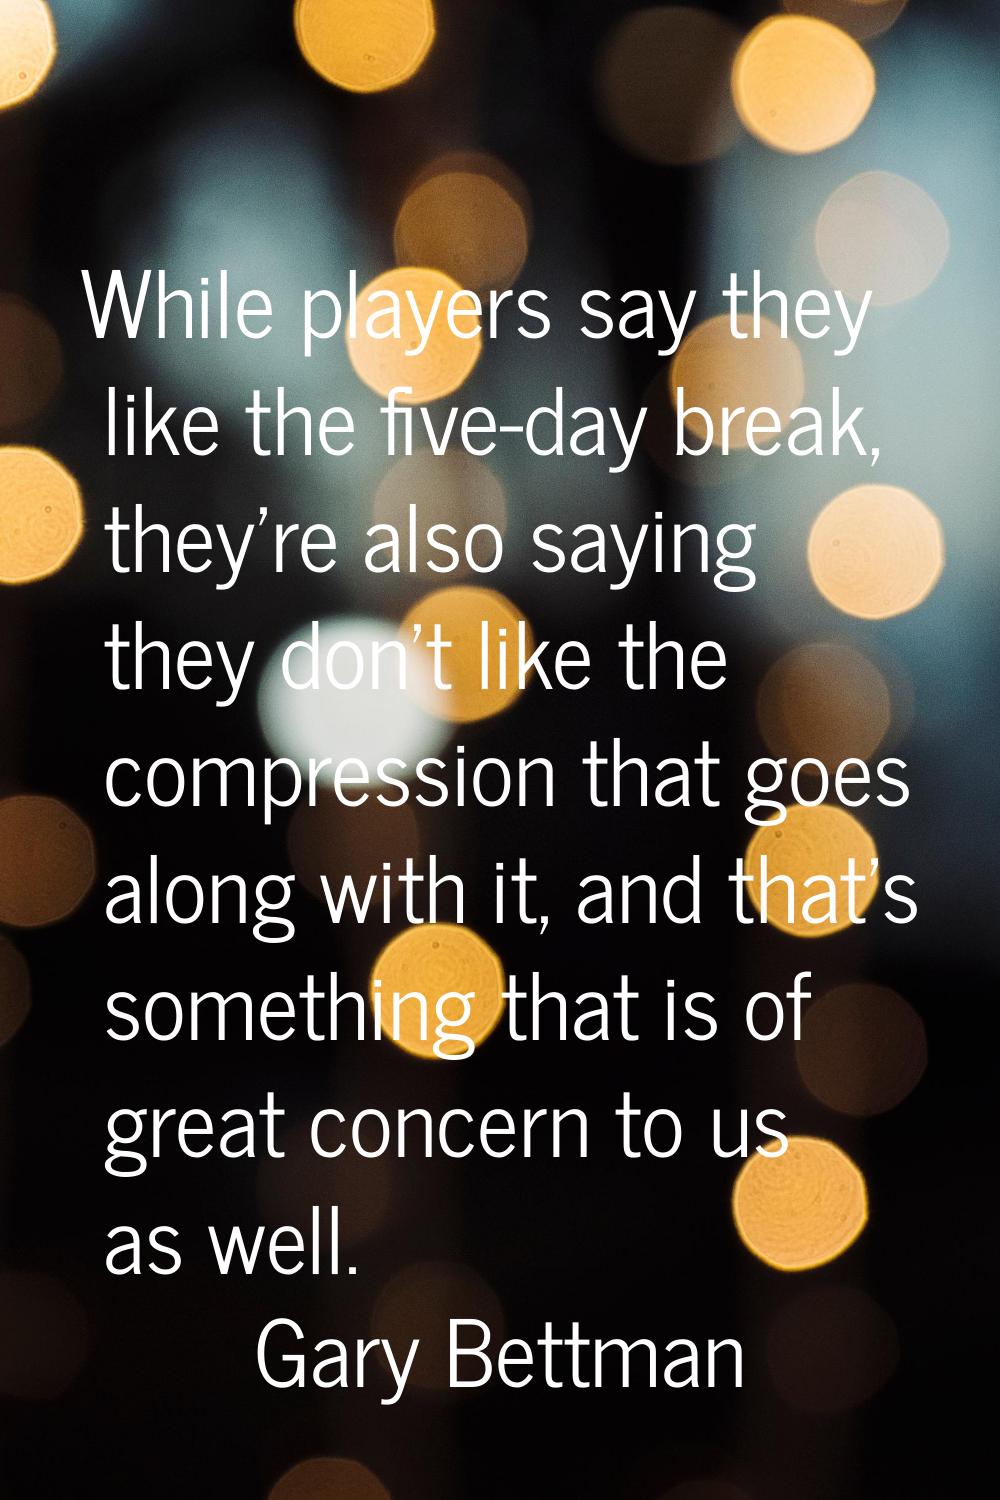 While players say they like the five-day break, they're also saying they don't like the compression